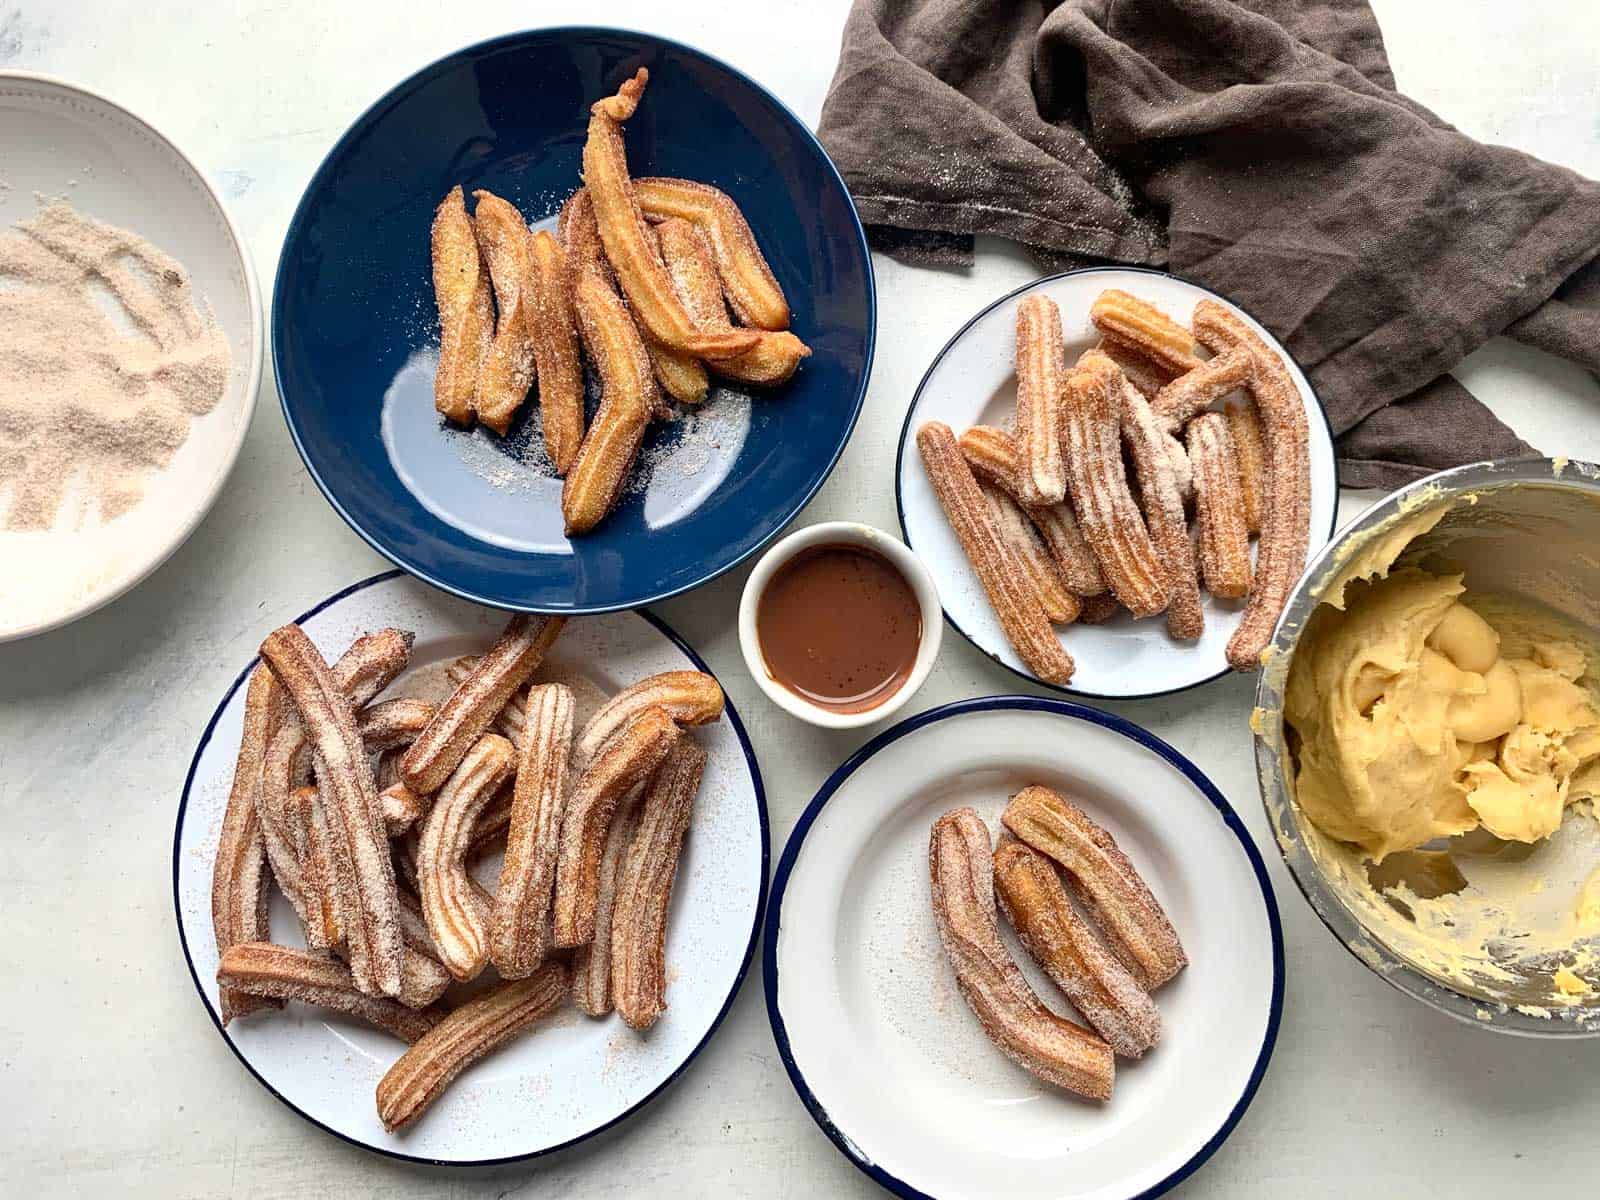 All the churros tests laid out on the table